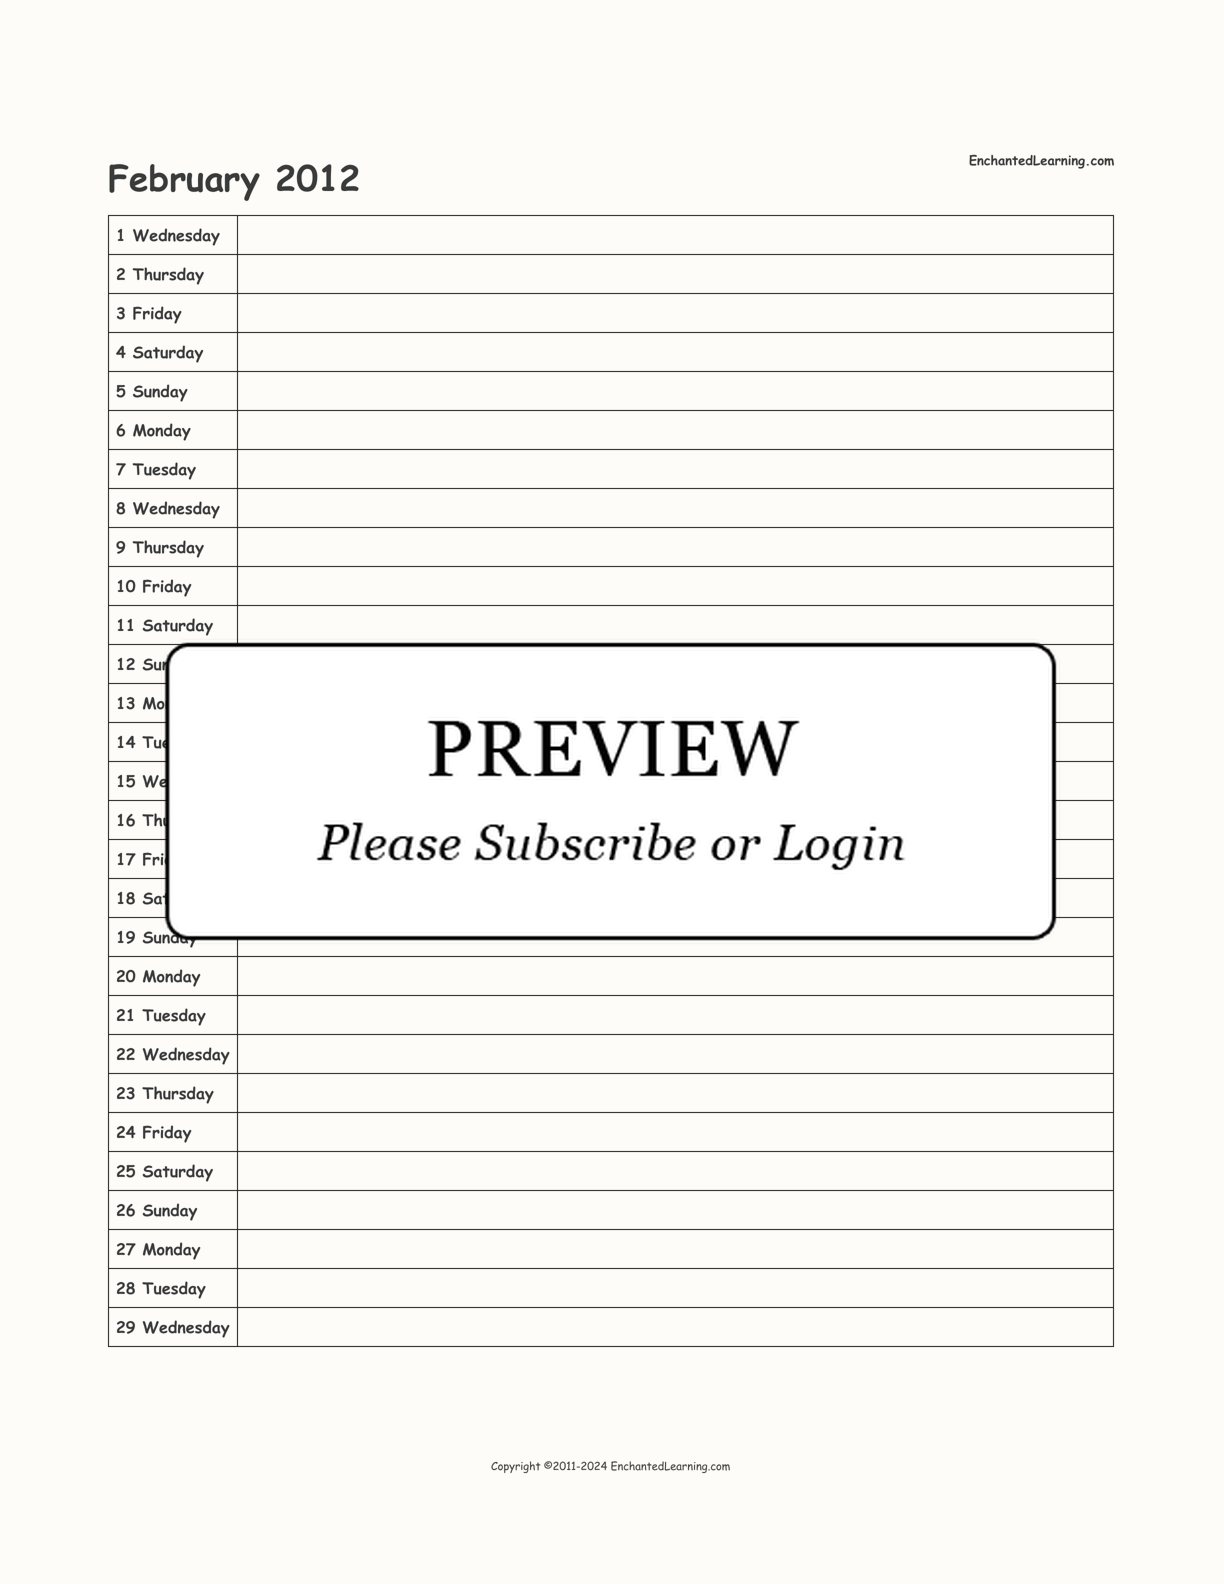 2012 Scheduling Calendar interactive printout page 2